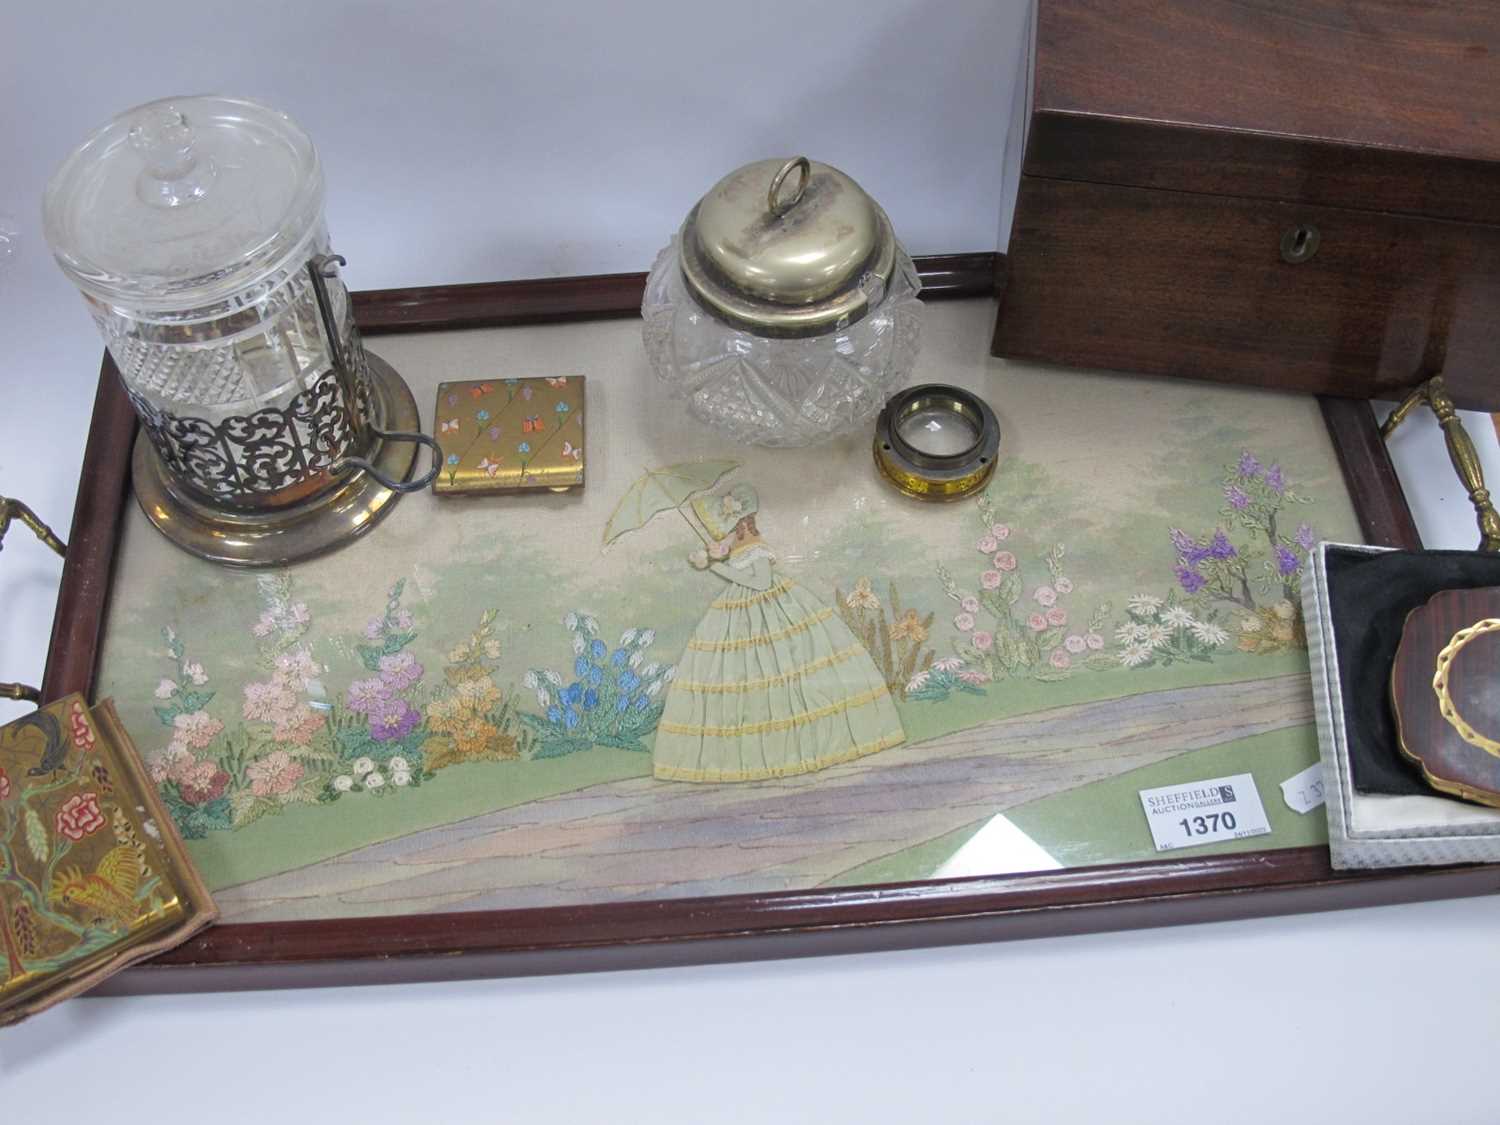 Vogue and Other Compacts. Mohagany tea caddy, embroidered paneled tray.